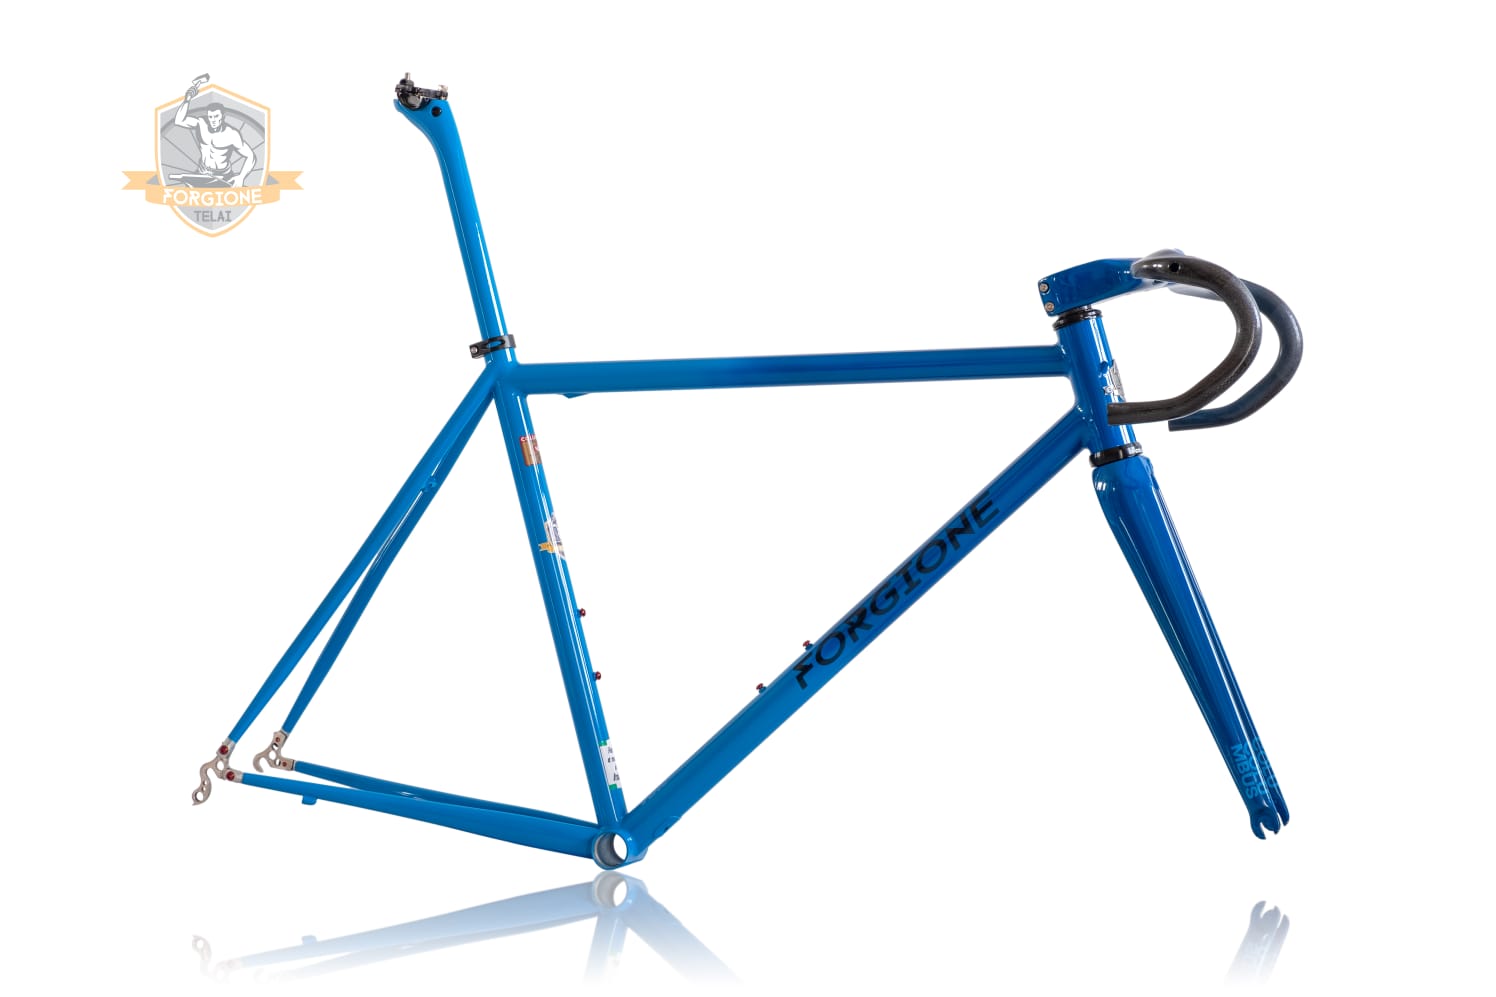 Profondo Blue (Deep Blue): handmade bicycle customized in silver fillet brazed